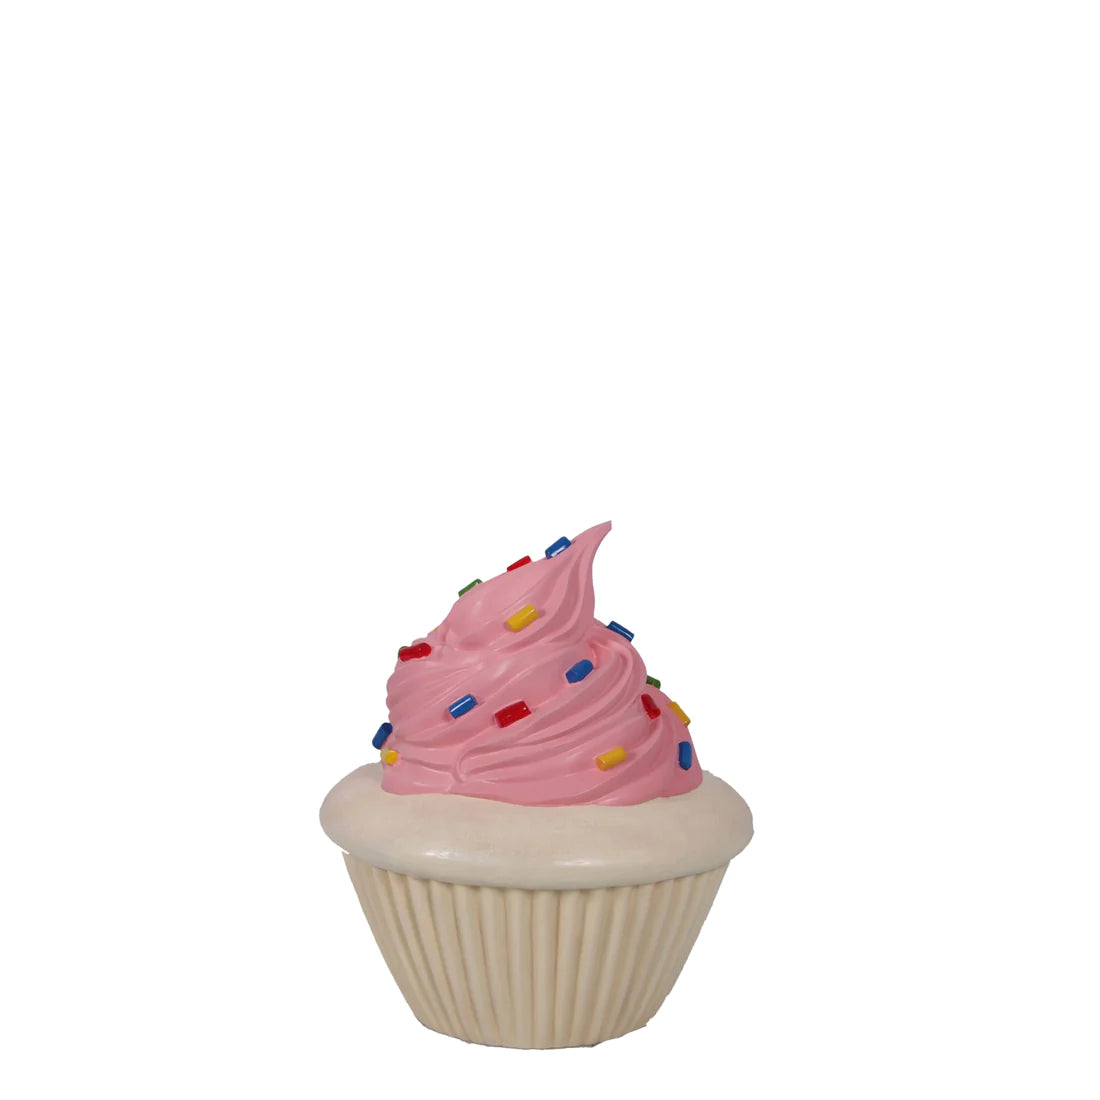 Cupcake With Sprinkles Over Sized Statue